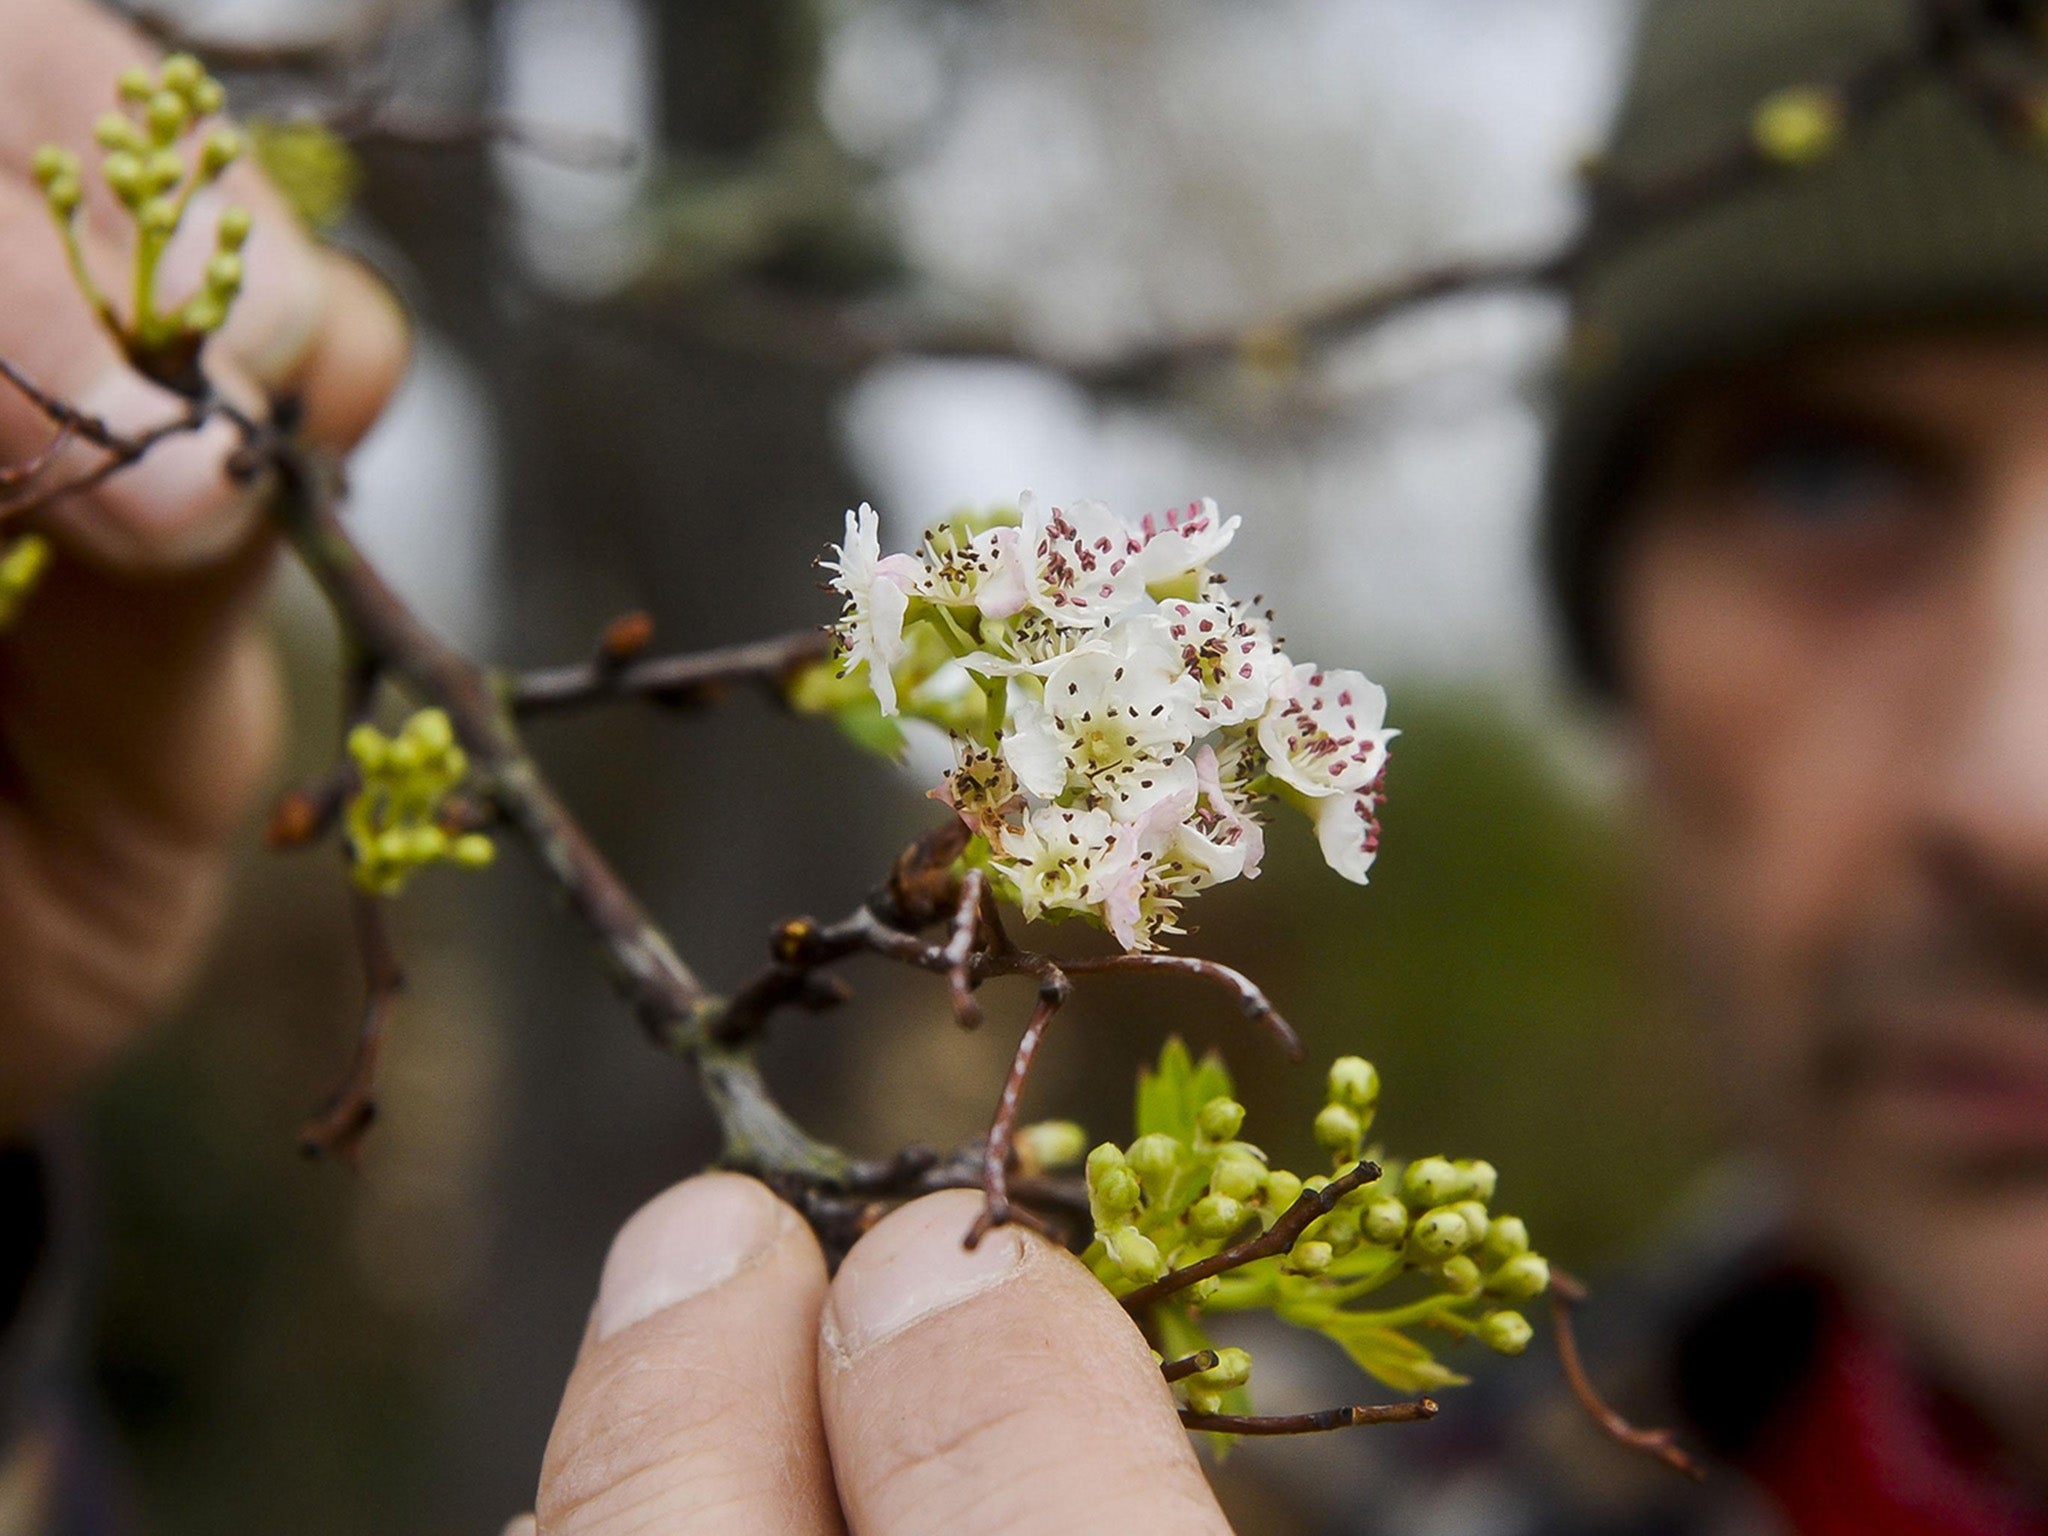 Early Hawthorn bloom of particular concern to botanists